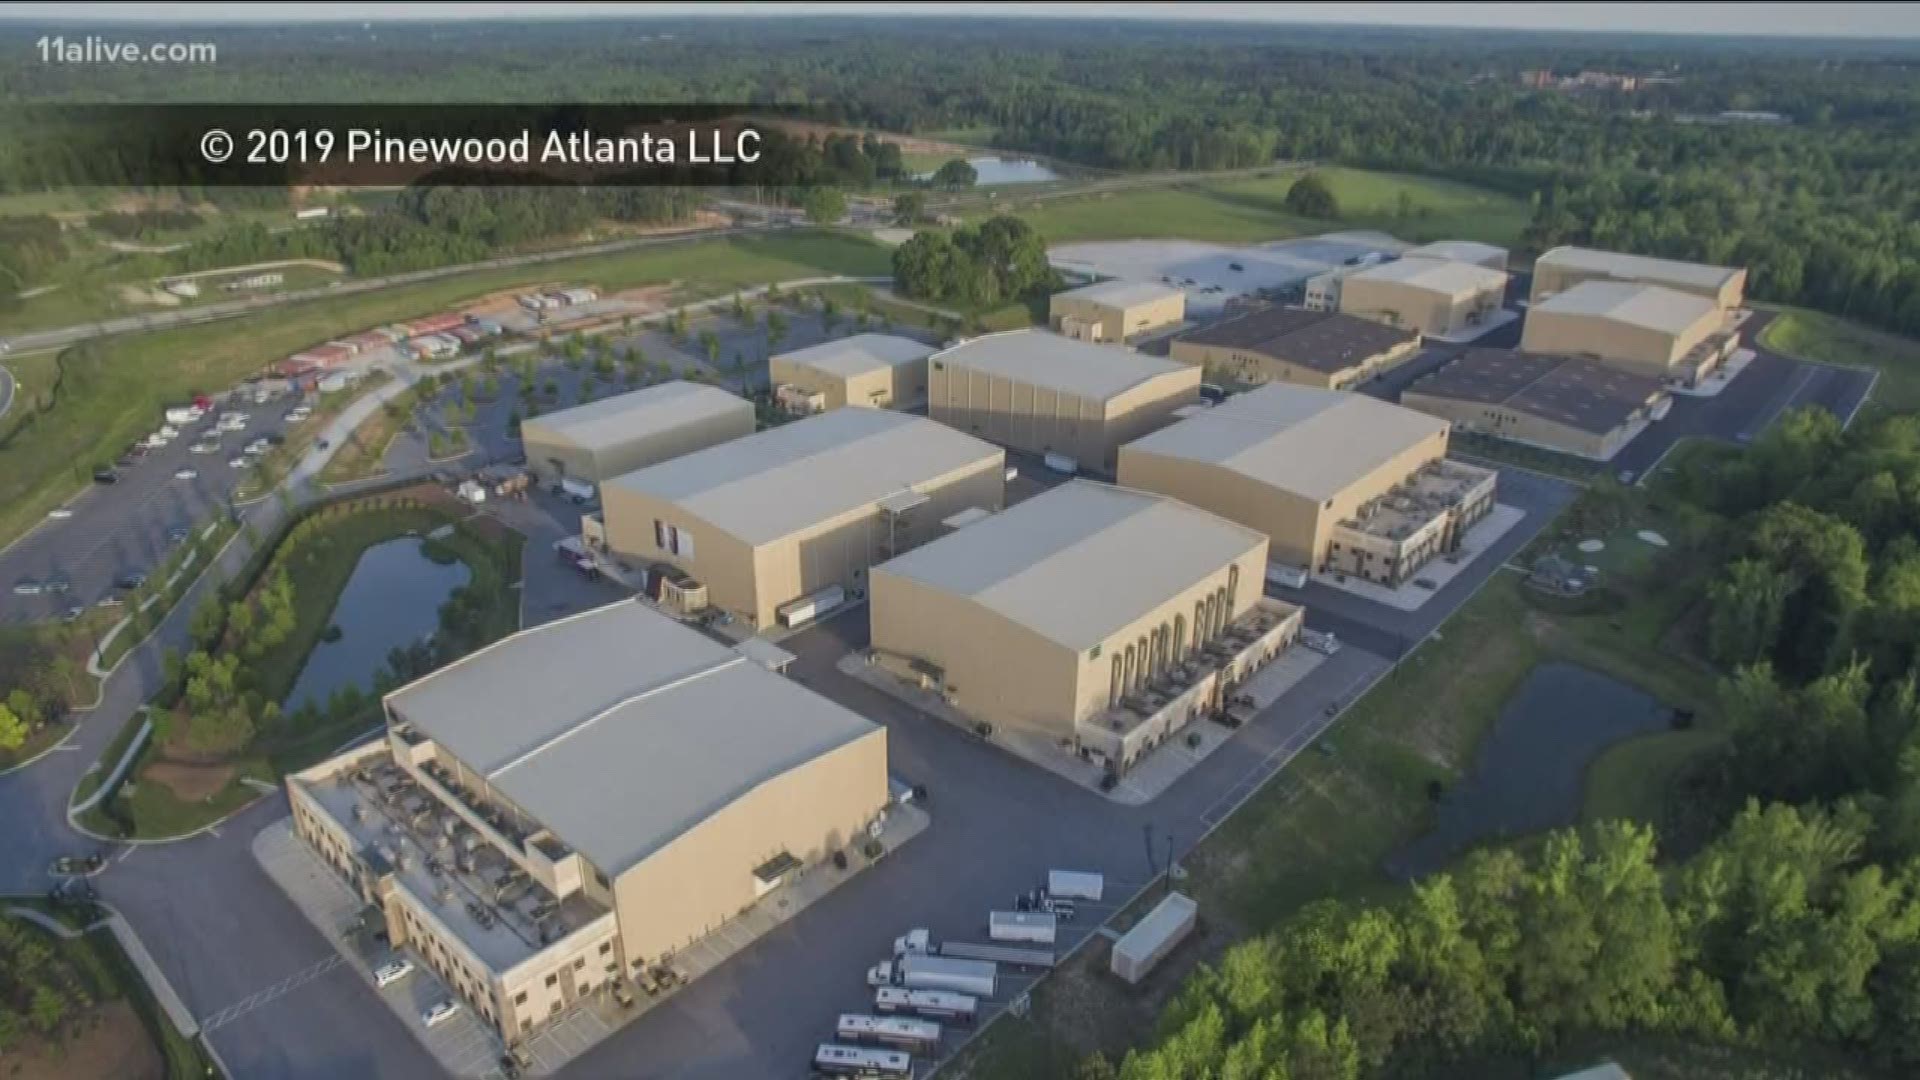 The leader of Pinewood Atlanta calls the investment a growth move for the company that already produces major films for Marvel and Warner Brothers.